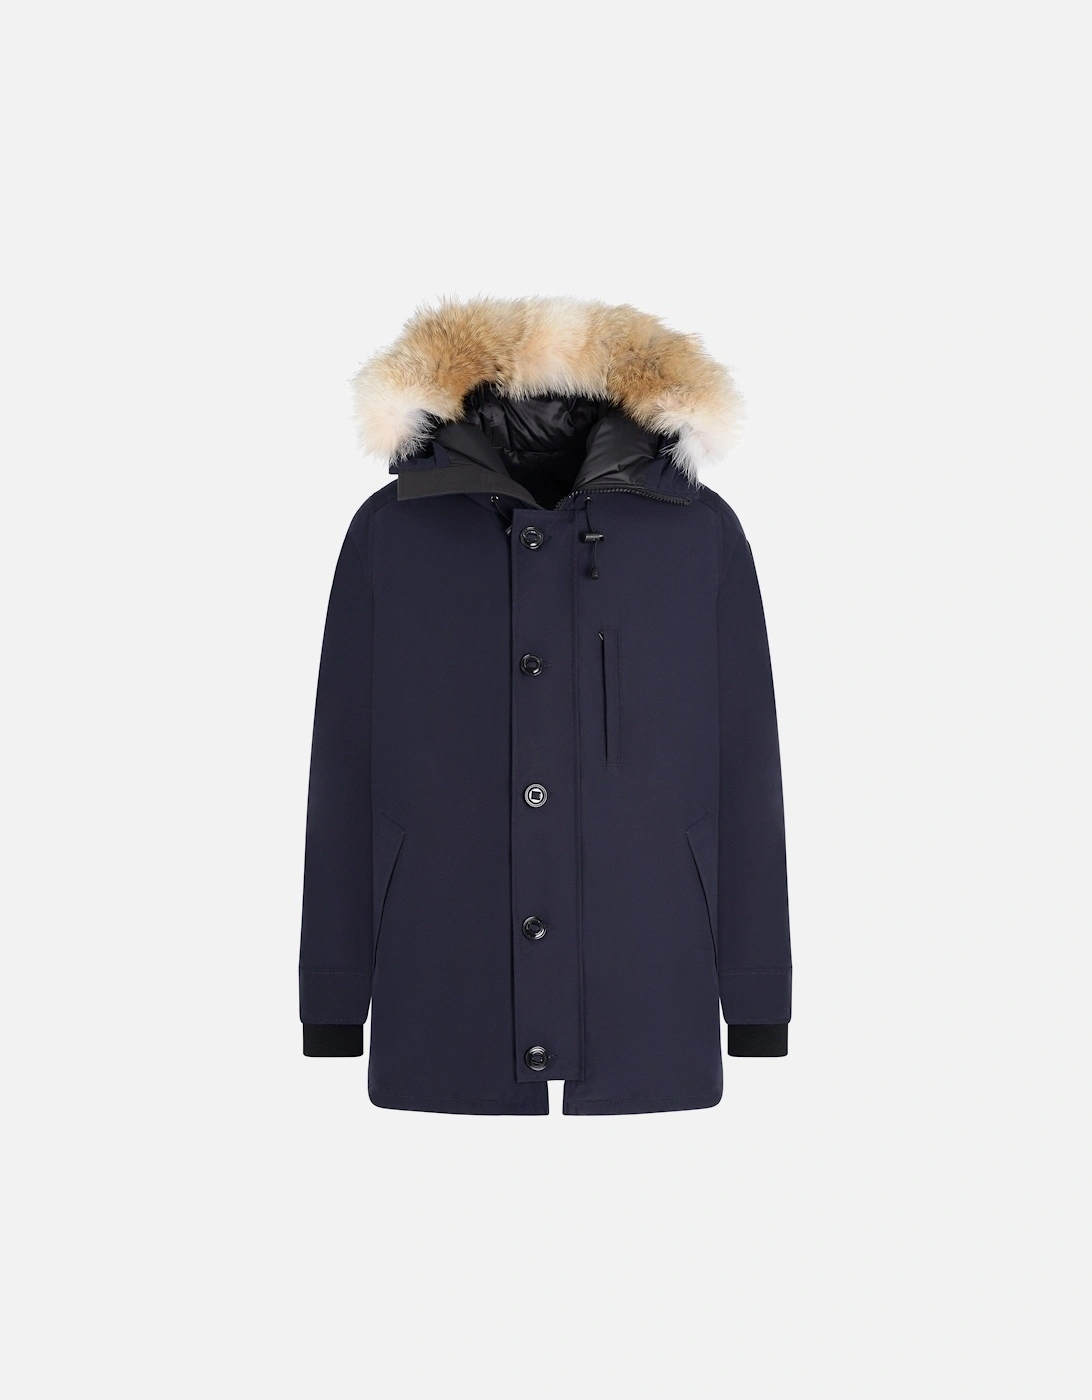 Chateau Parka Black Label With Fur Navy, 6 of 5